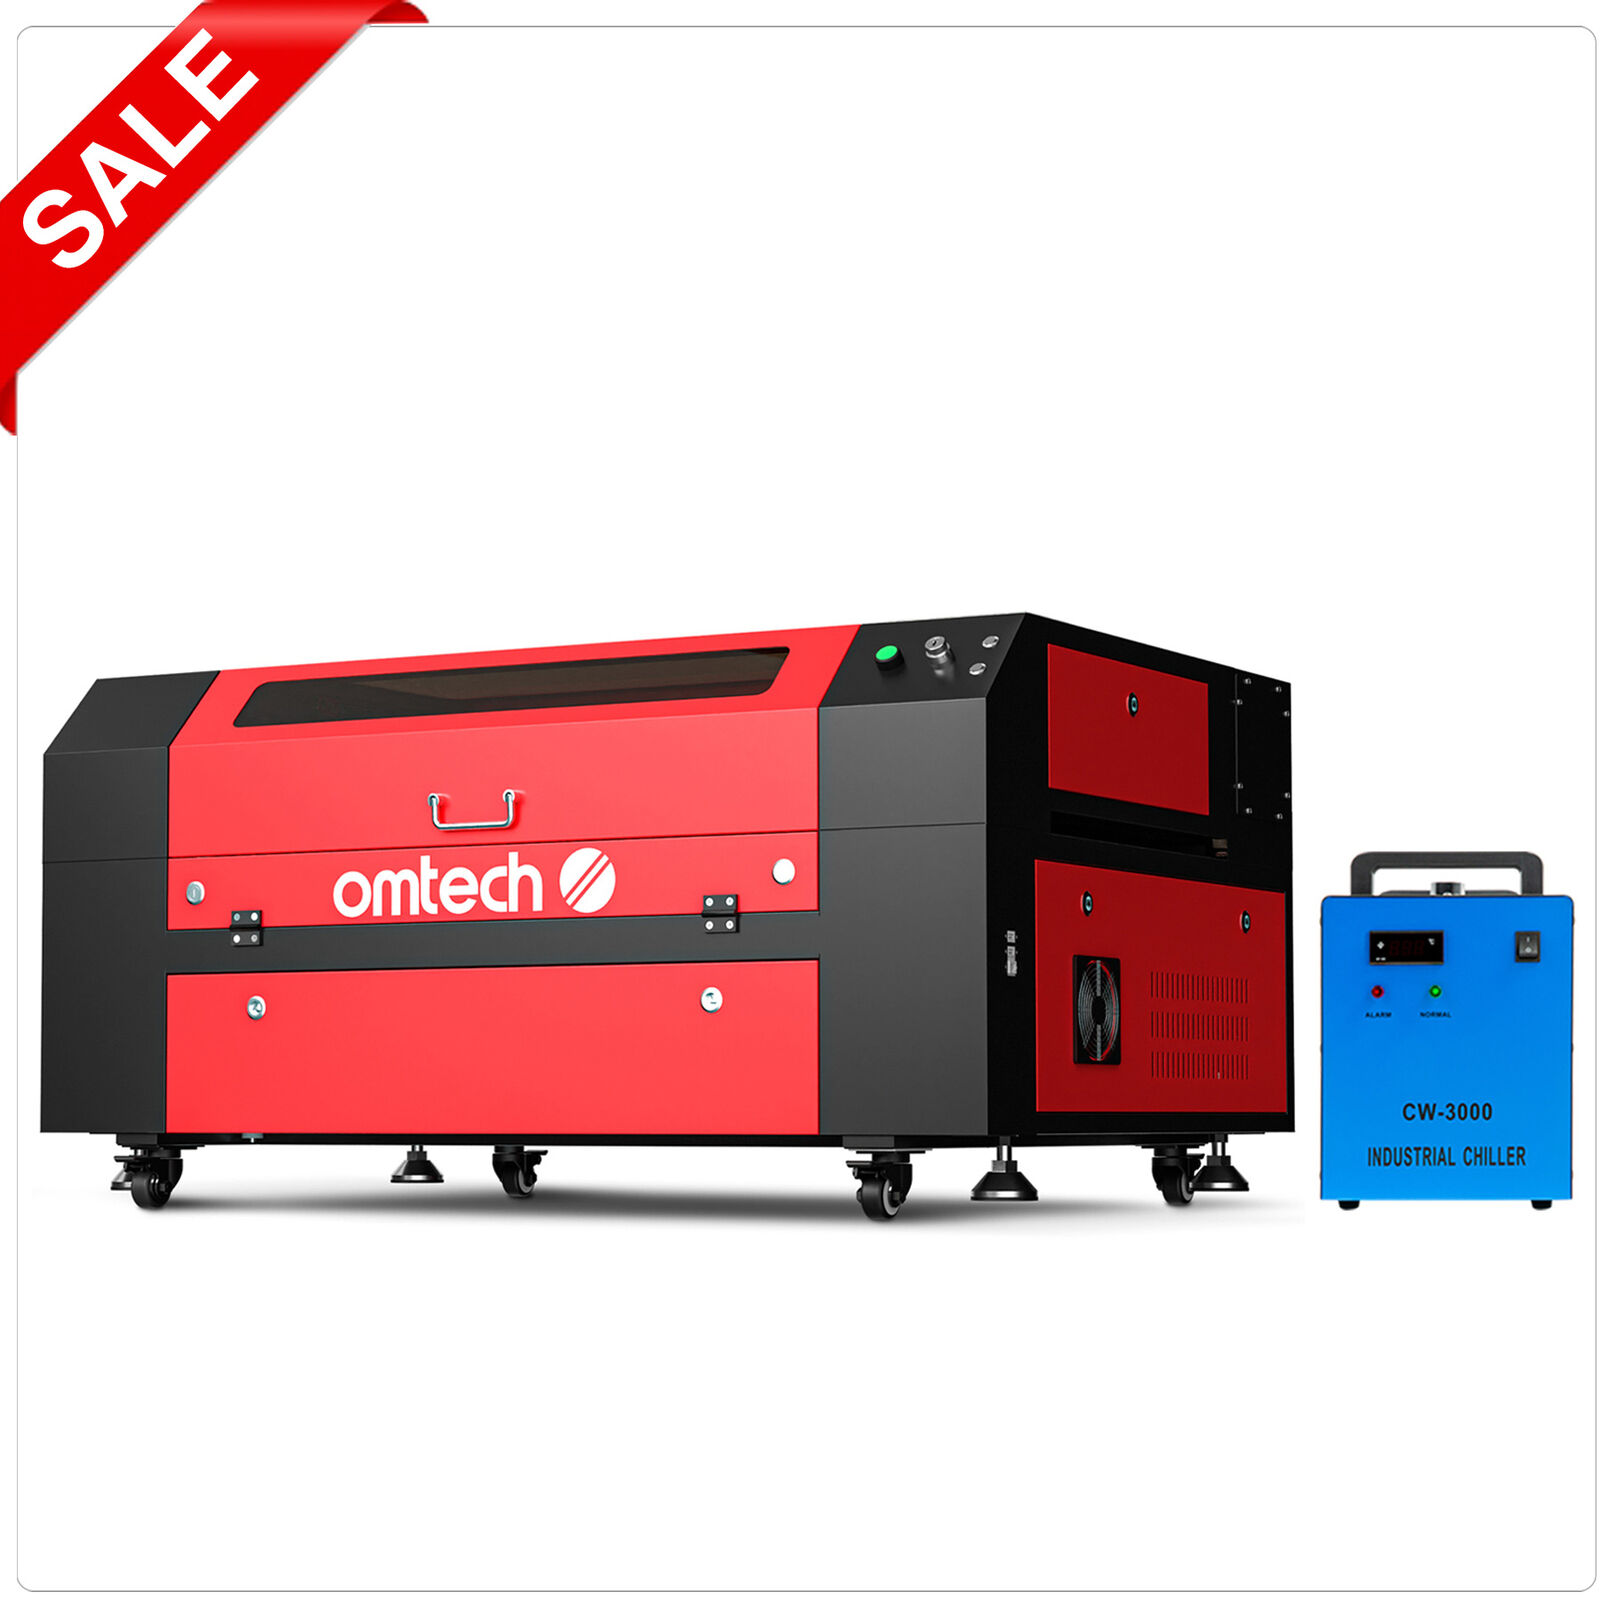 OMTech 28x20 in. 60W CO2 laser Engraver Cutter Marker with CW-3000 Water Chiller